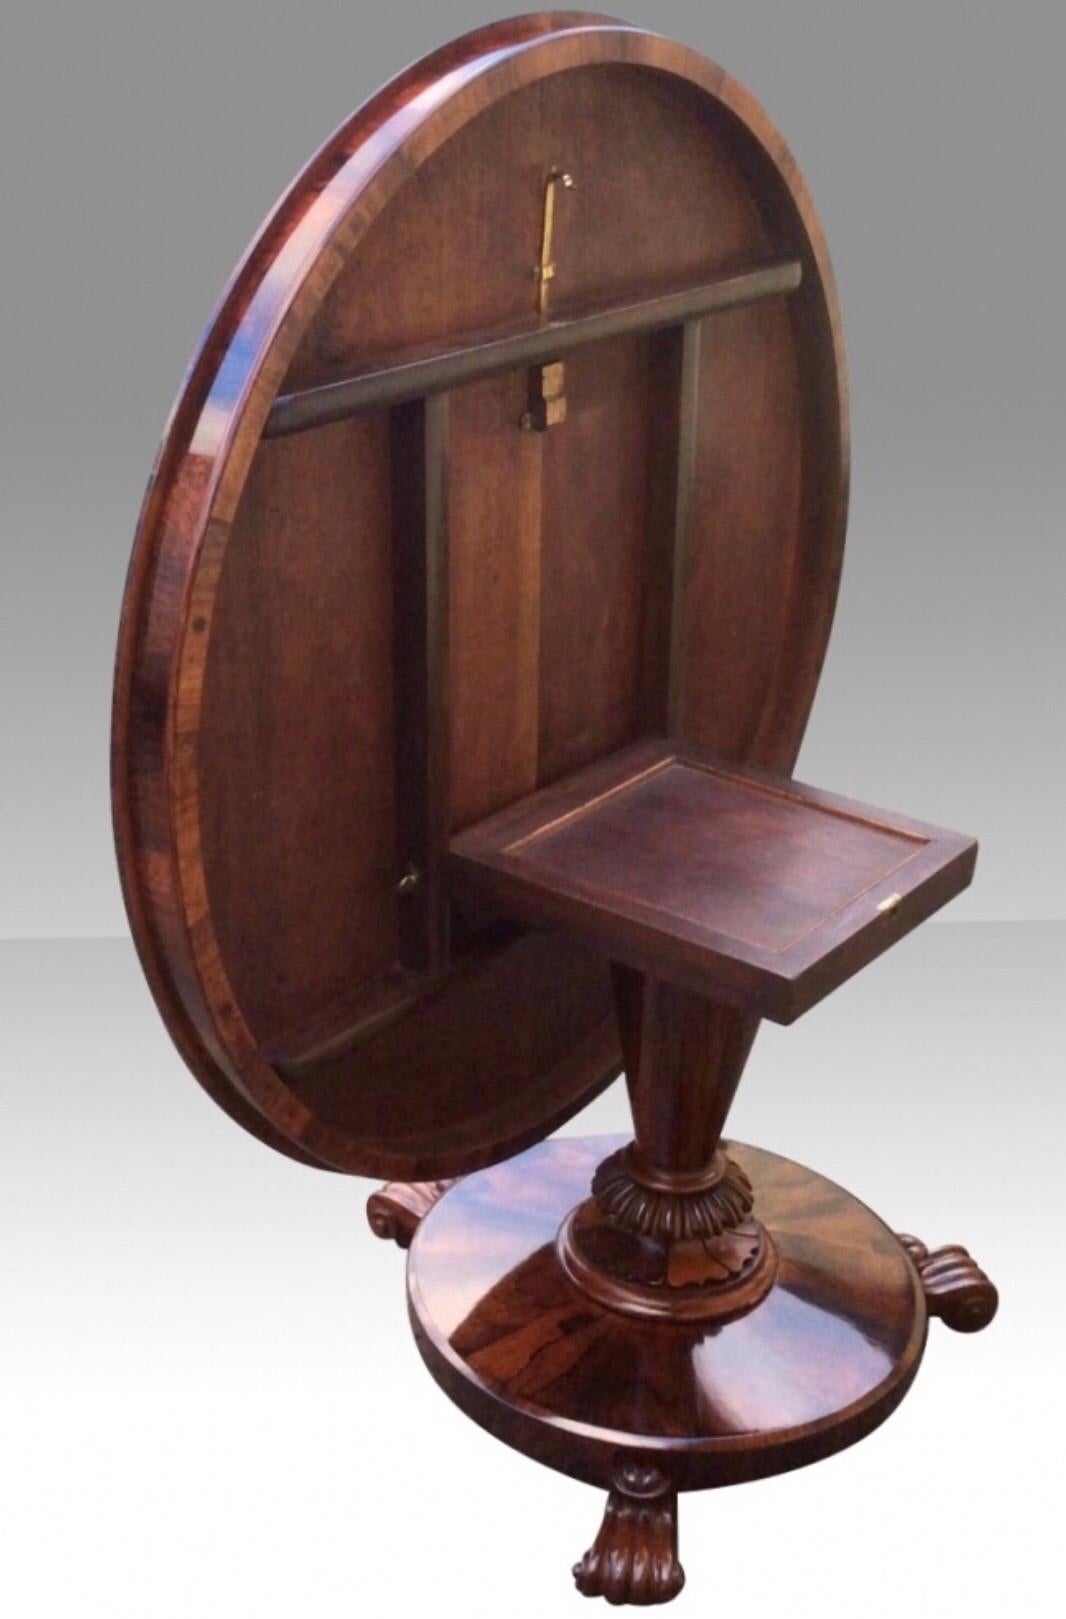 Superb Quality William IV rosewood tilt top circular centre table / dining table /hall table with Pedestal Base and carved feet of small proportions .
Measures: 124cm diameter x 74cm tall
(48.5ins diameter).